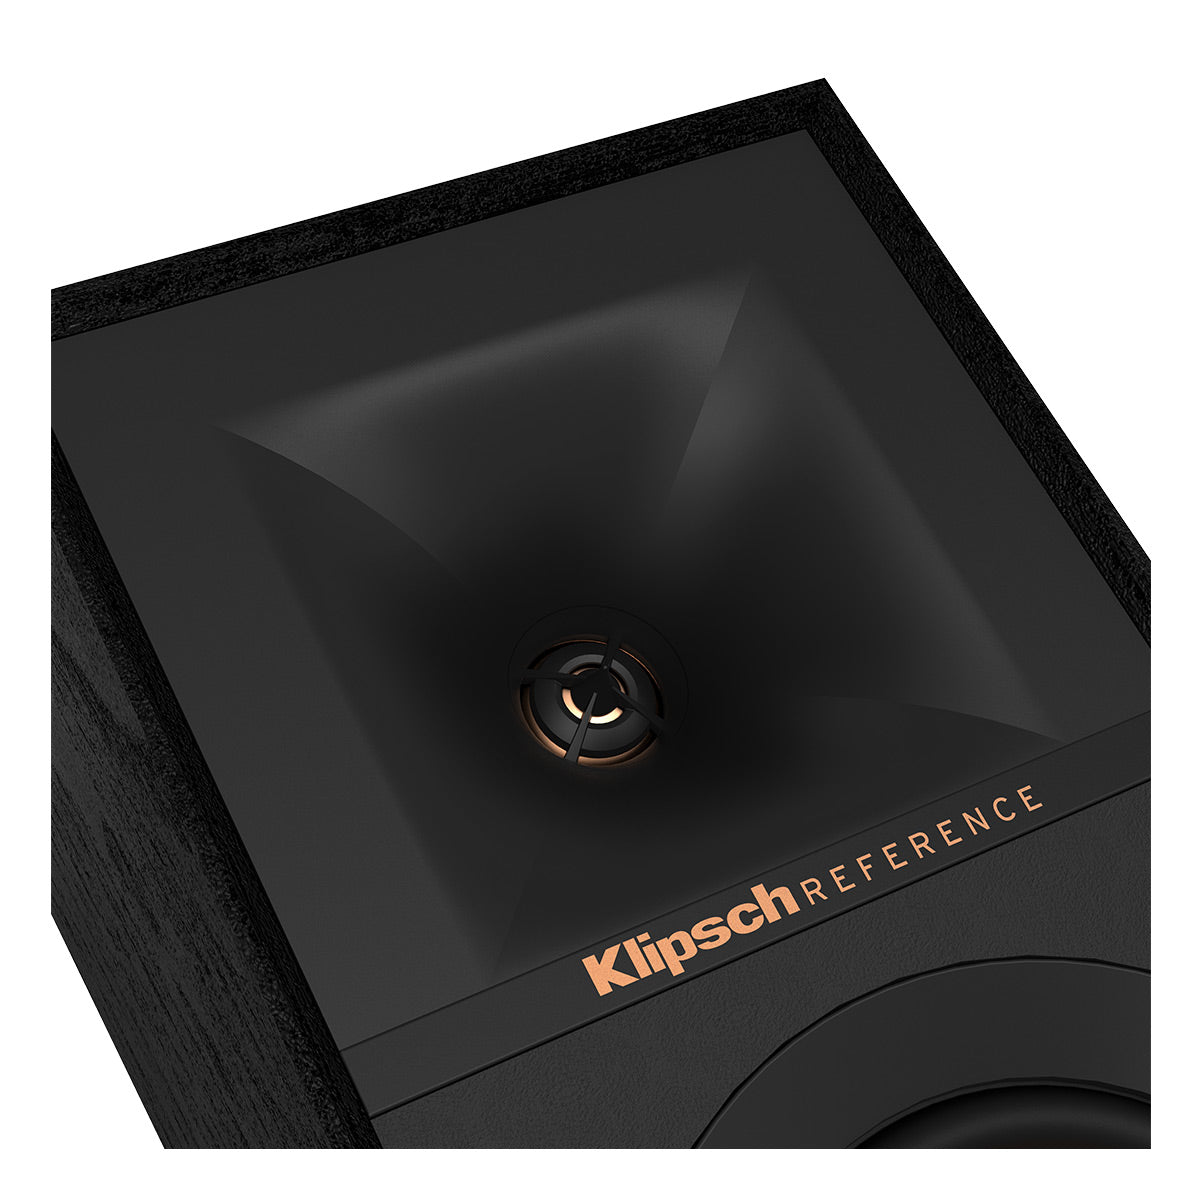 Klipsch R-40SA Reference Dolby Atmos Speakers - Pair (Black)